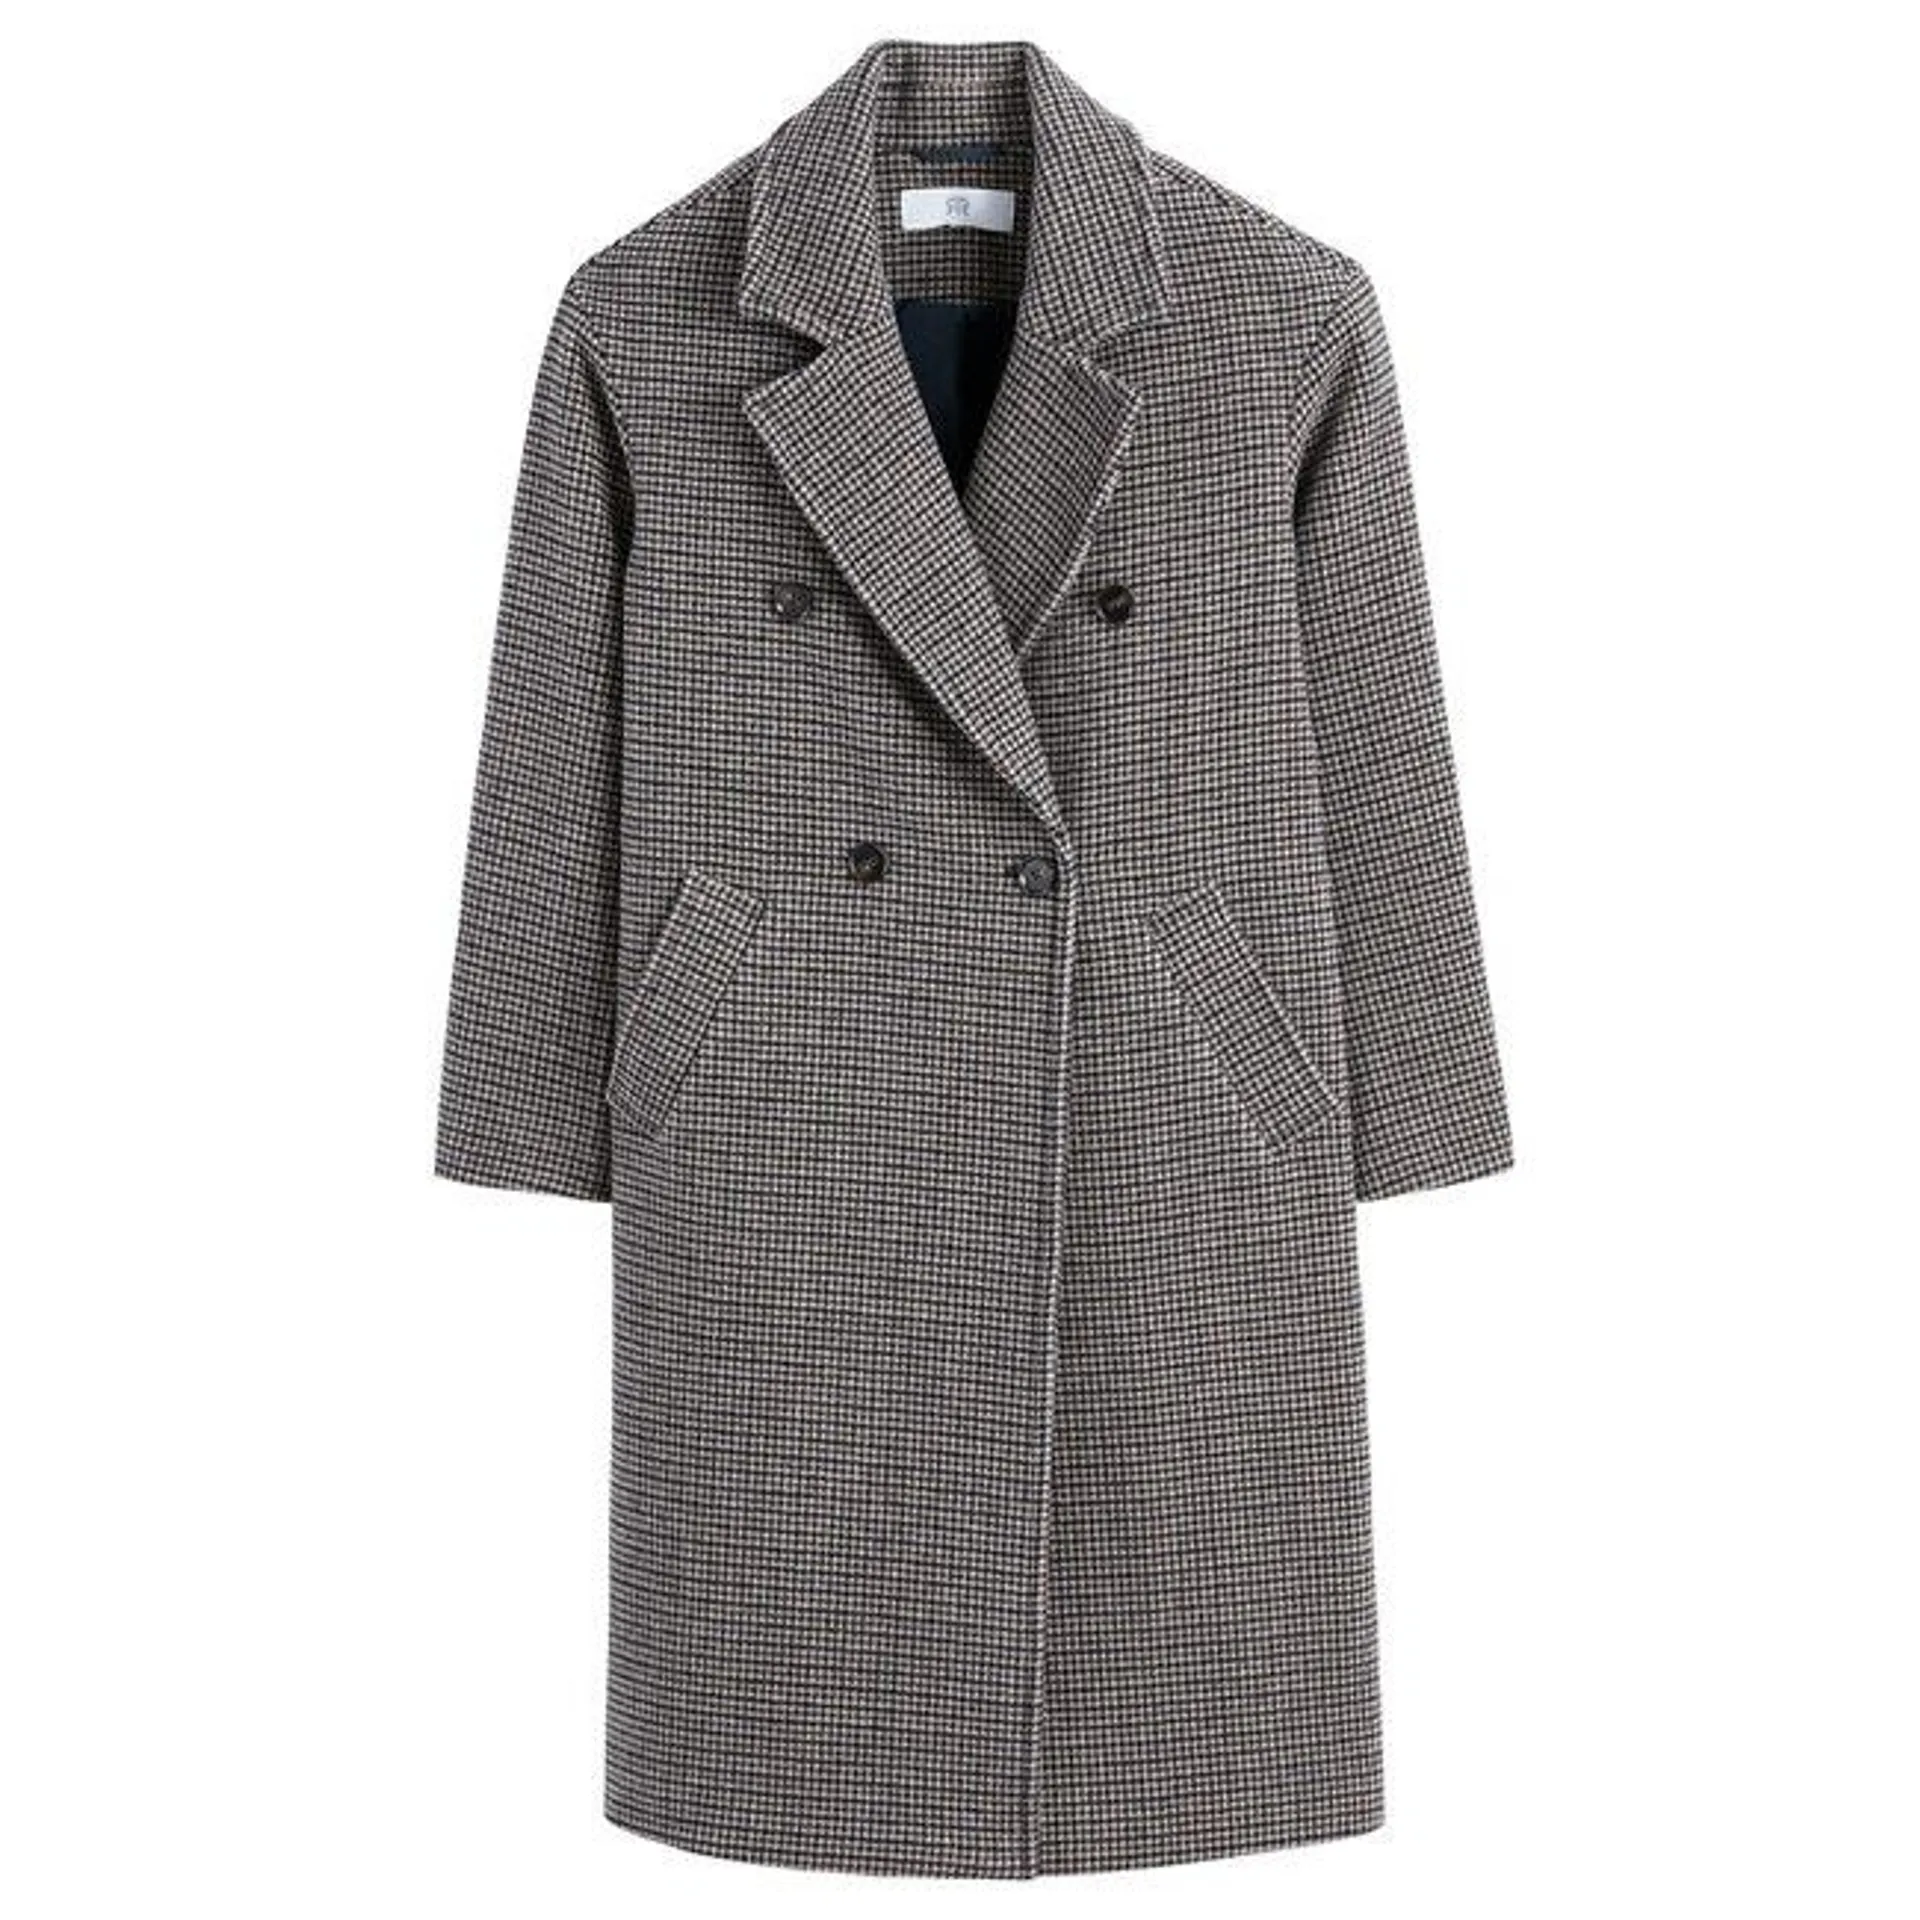 Wool Mix Coat in Houndstooth Check